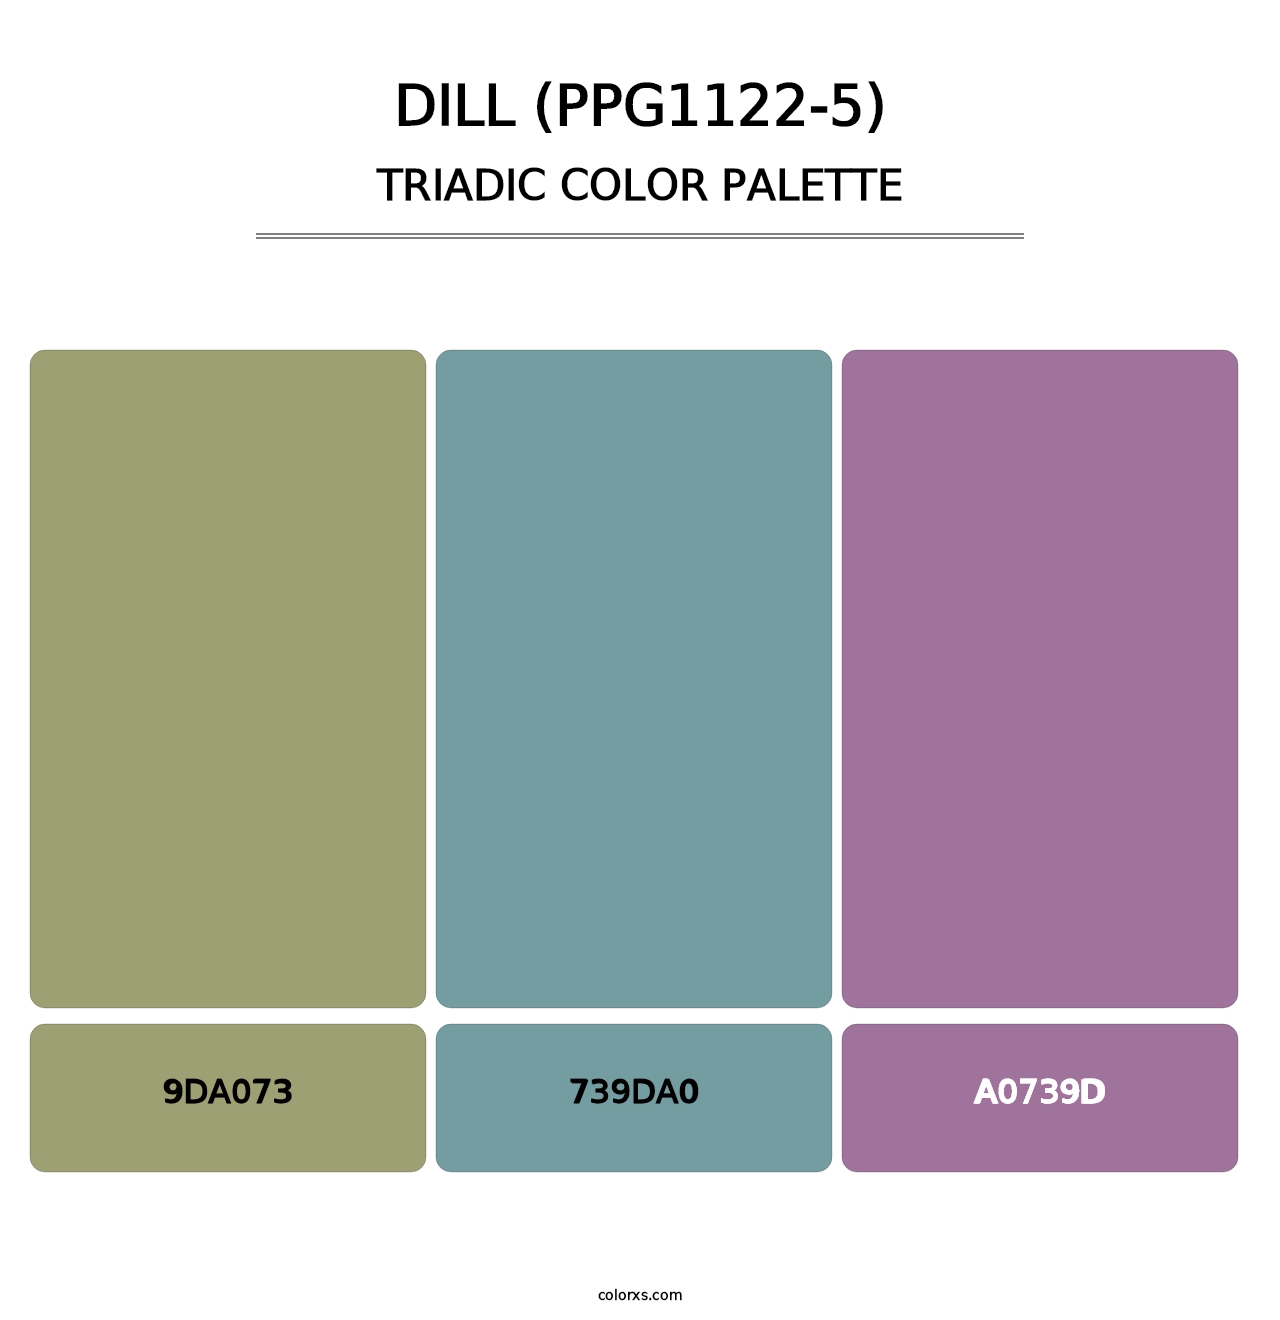 Dill (PPG1122-5) - Triadic Color Palette